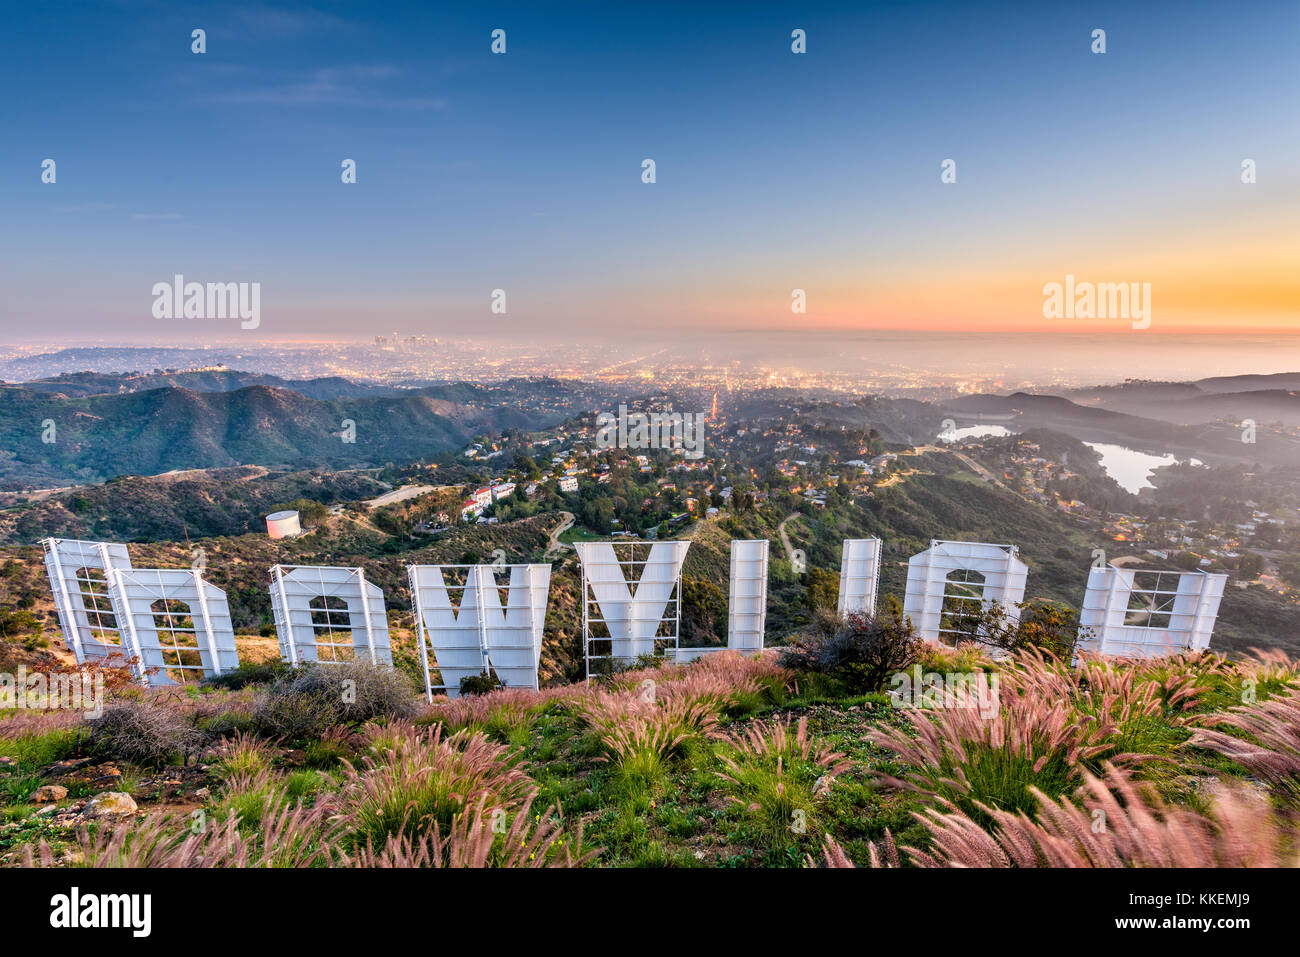 LOS ANGELES, CALIFORNIA - FEBRUARY 29, 2016: The Hollywood sign overlooking Los Angeles. The iconic sign was originally created in 1923. Stock Photo